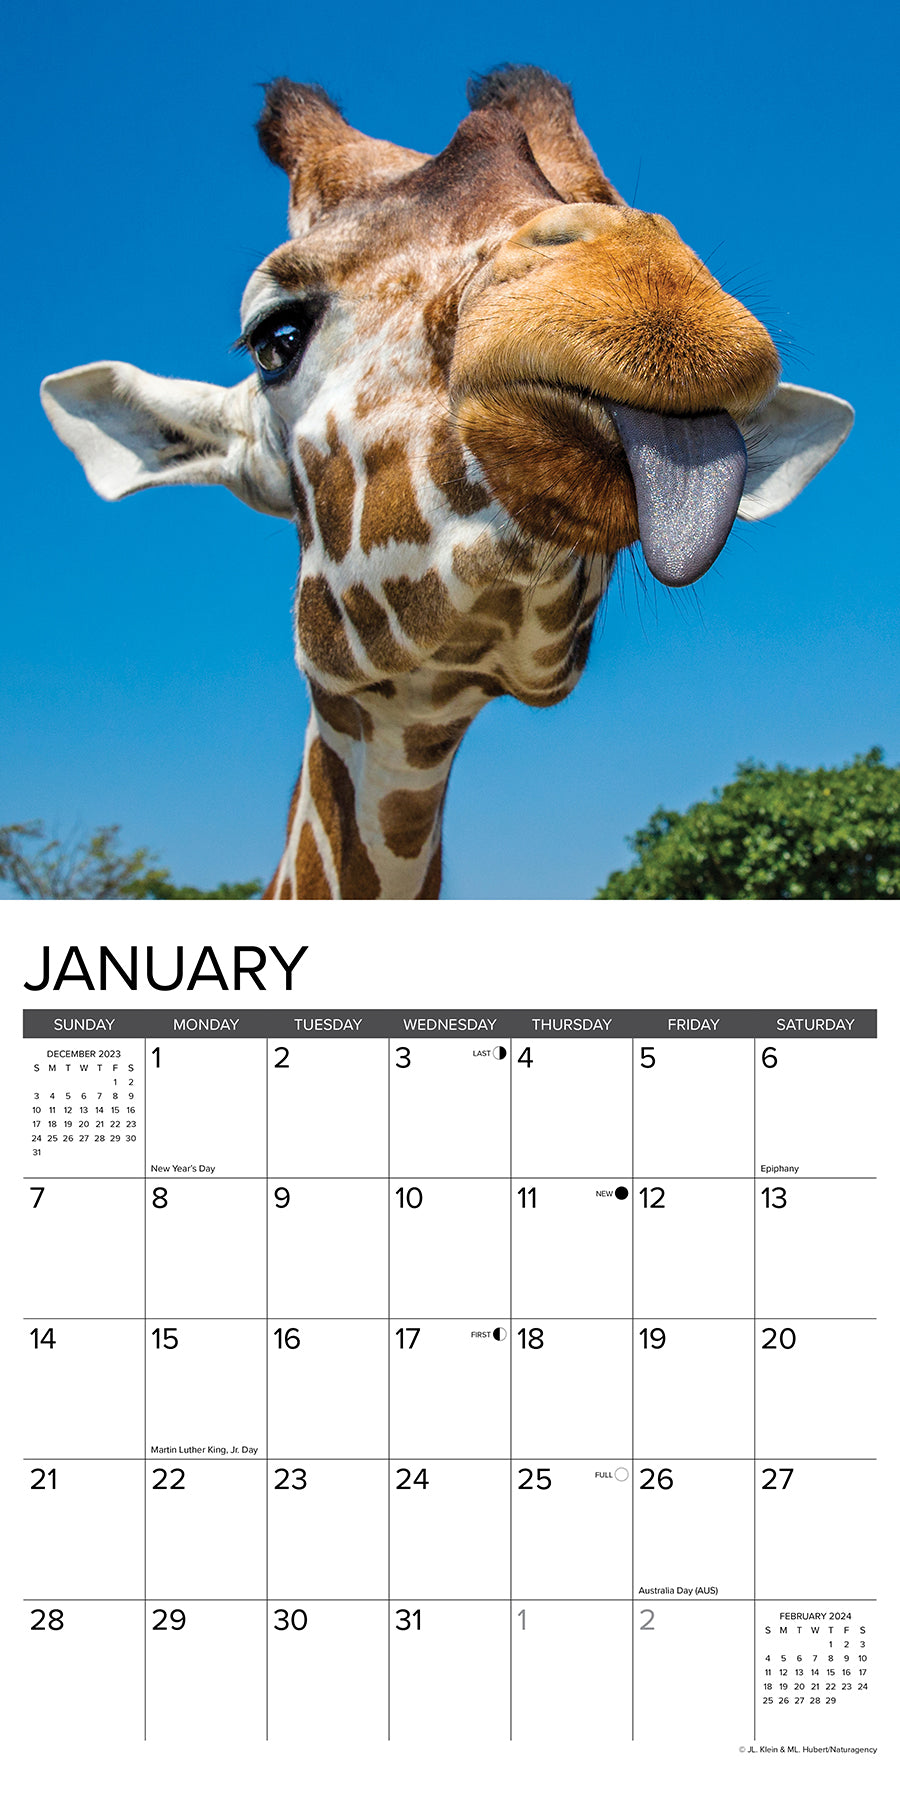 Calendrier d'animaux sauvages 2024 My Wildlife